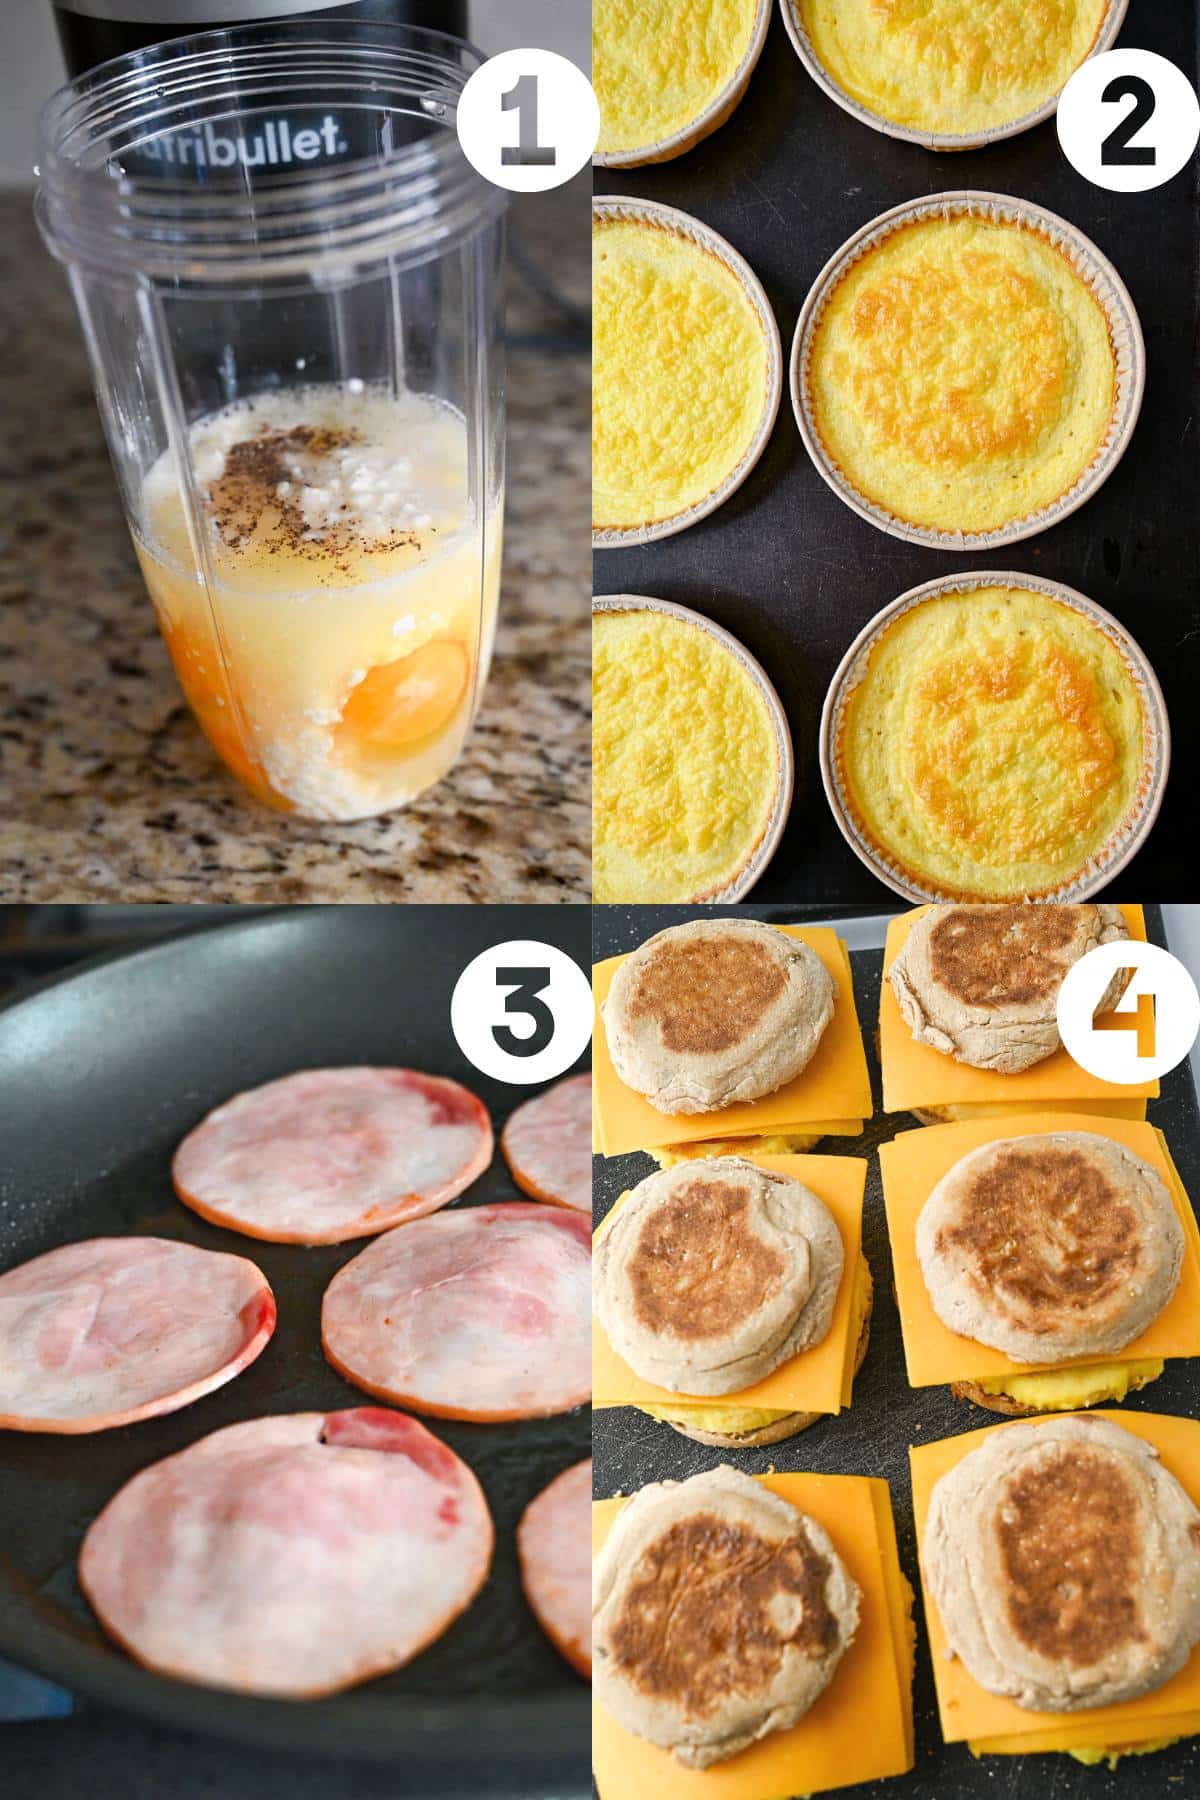 four steps making egg mcmuffins: egg patty mixture in a blender, cooked egg patties, cooked canadian bacon, and assembled sandwiches